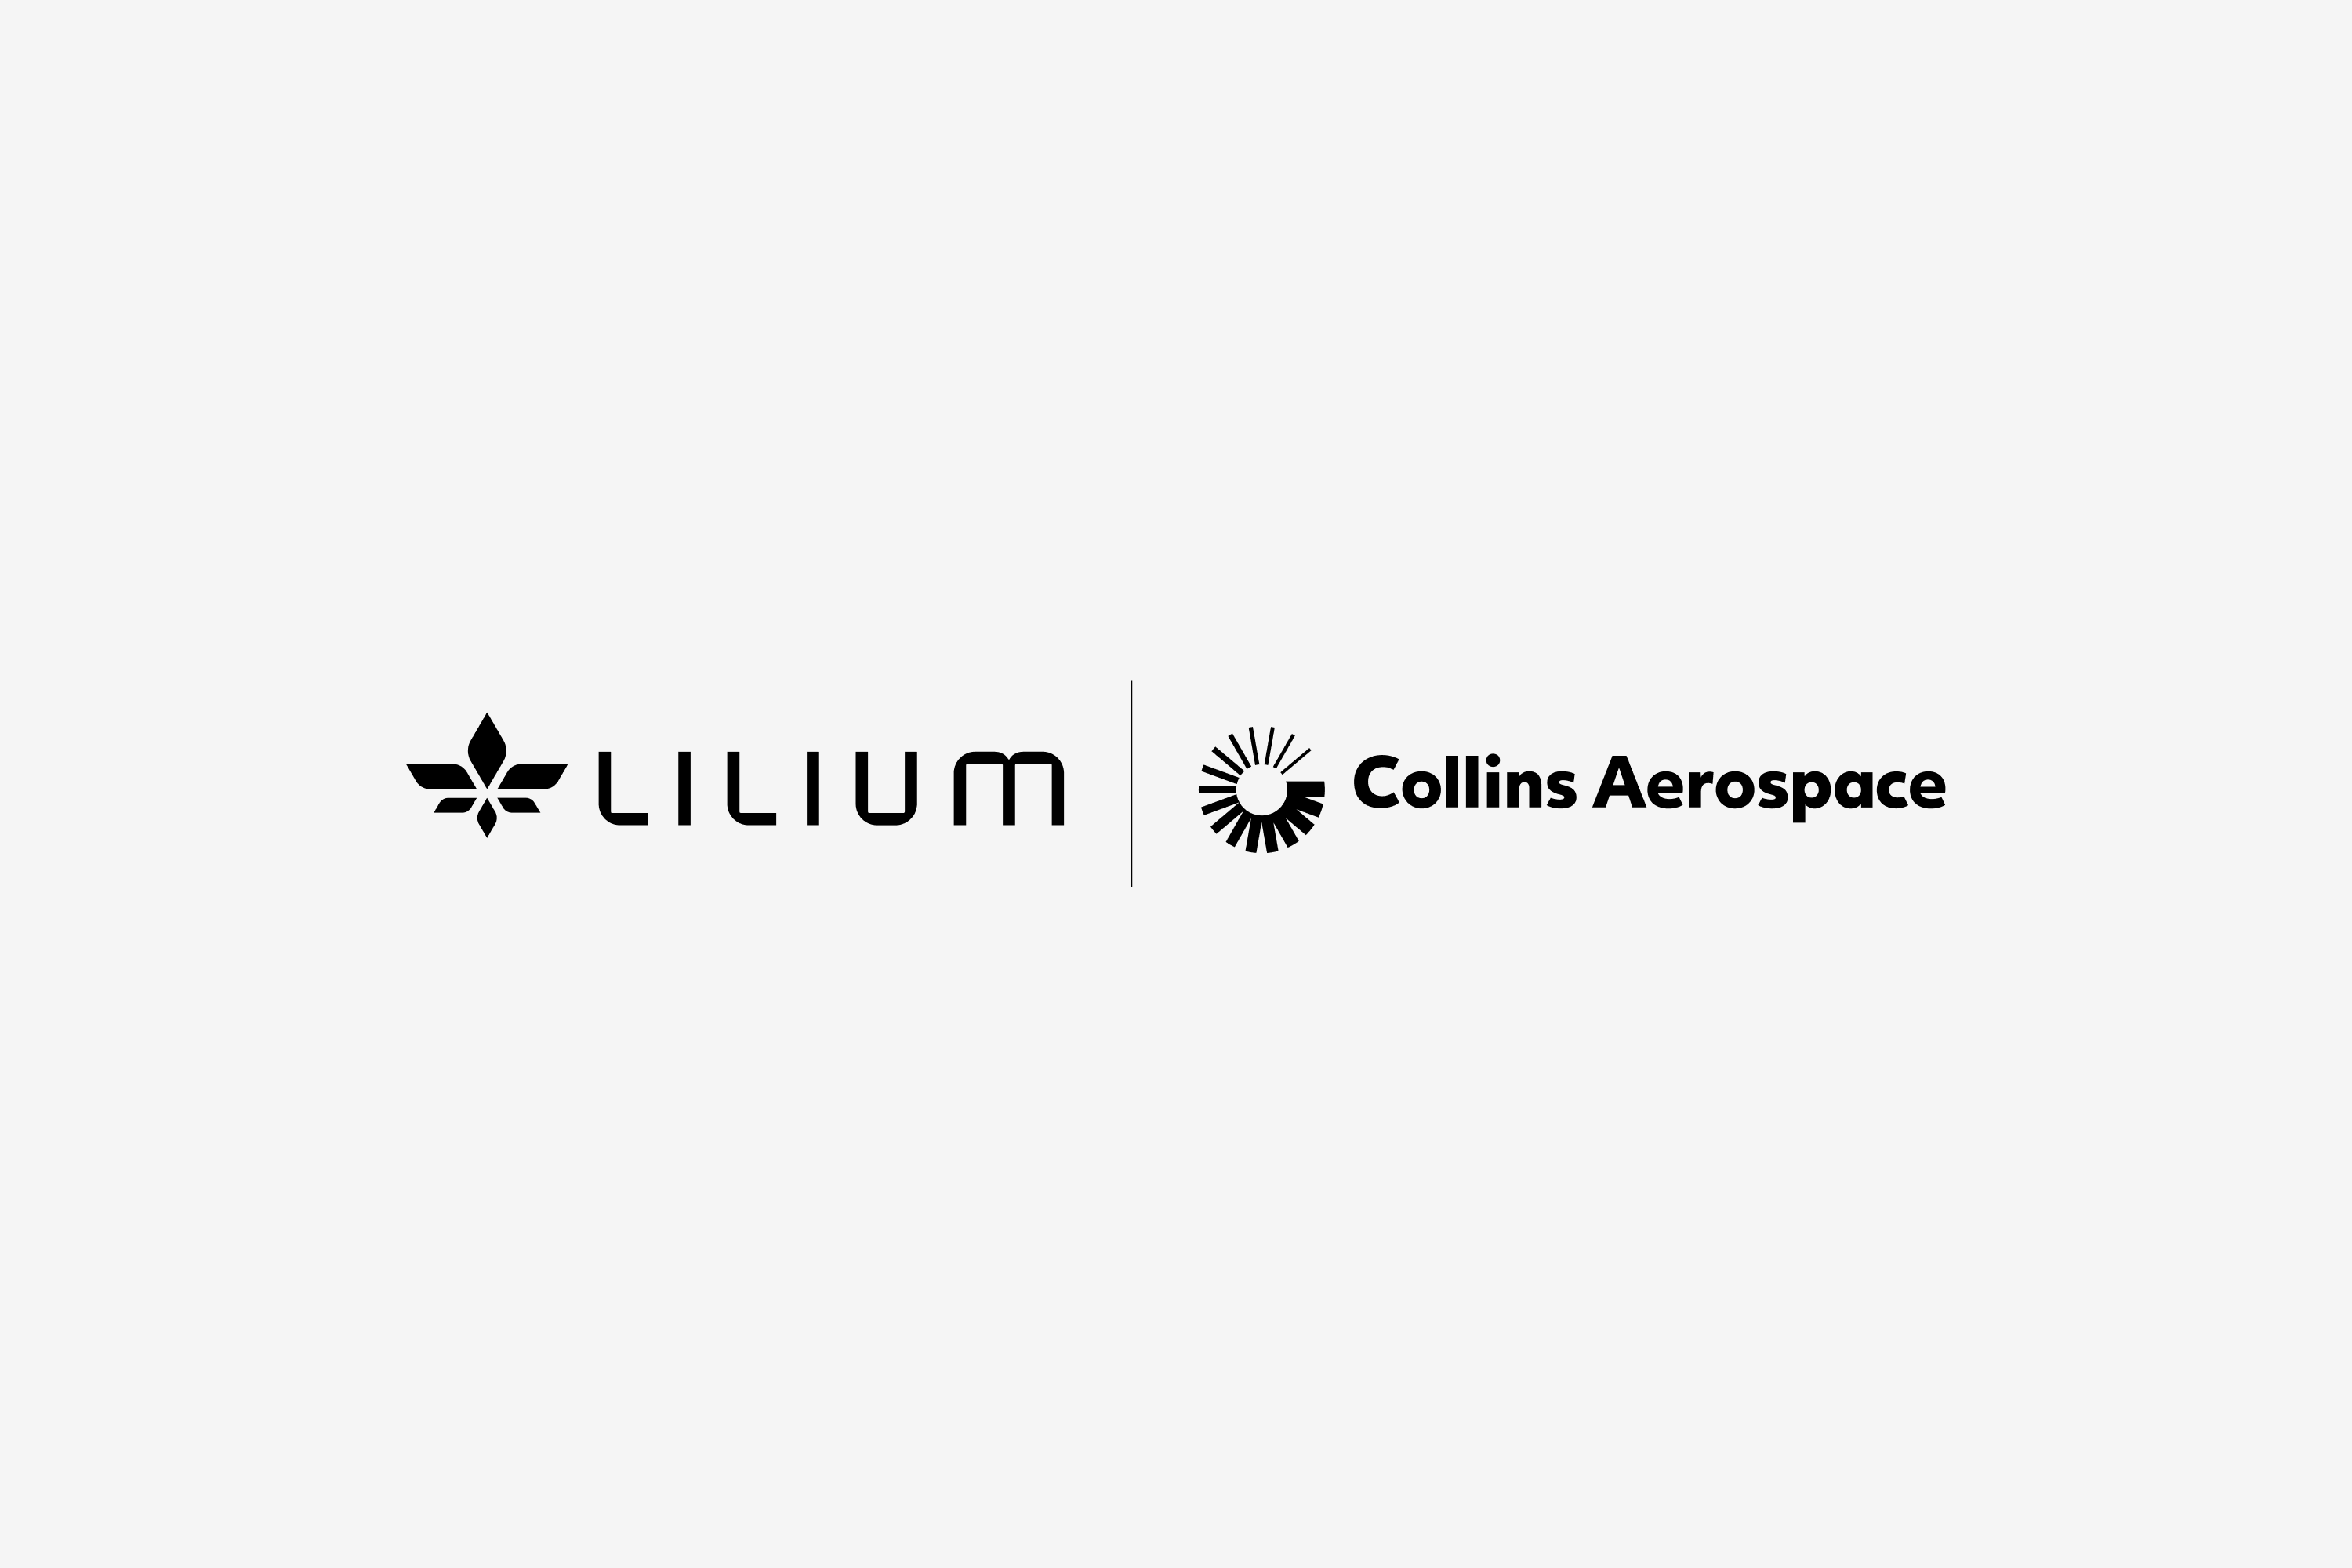 Lilium teams with Collins Aerospace to build new Innovative Inceptor System